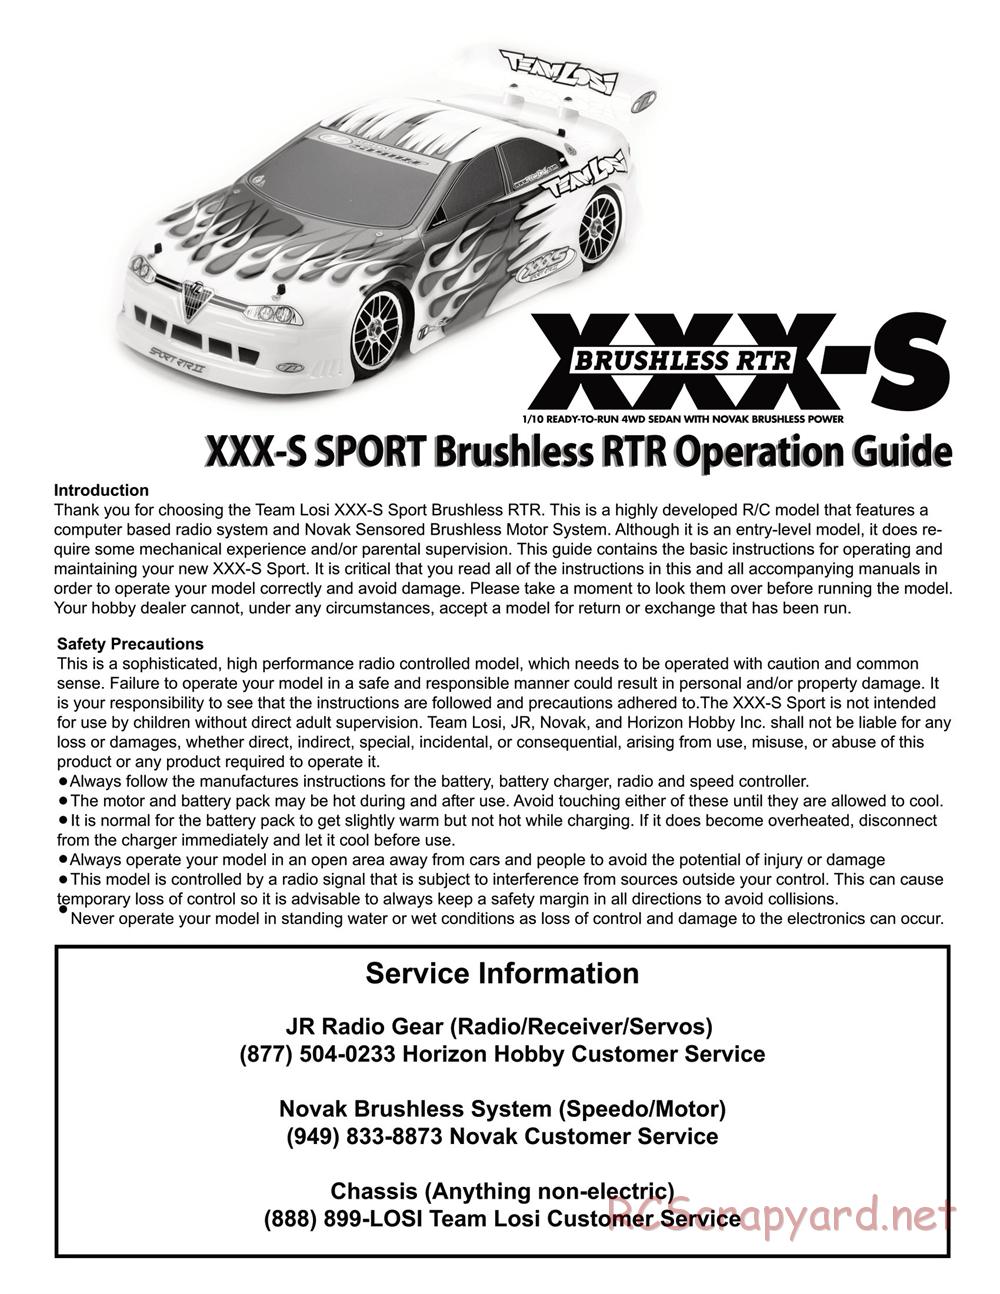 Team Losi - XXX-S Sport Brushless - Manual - Page 1